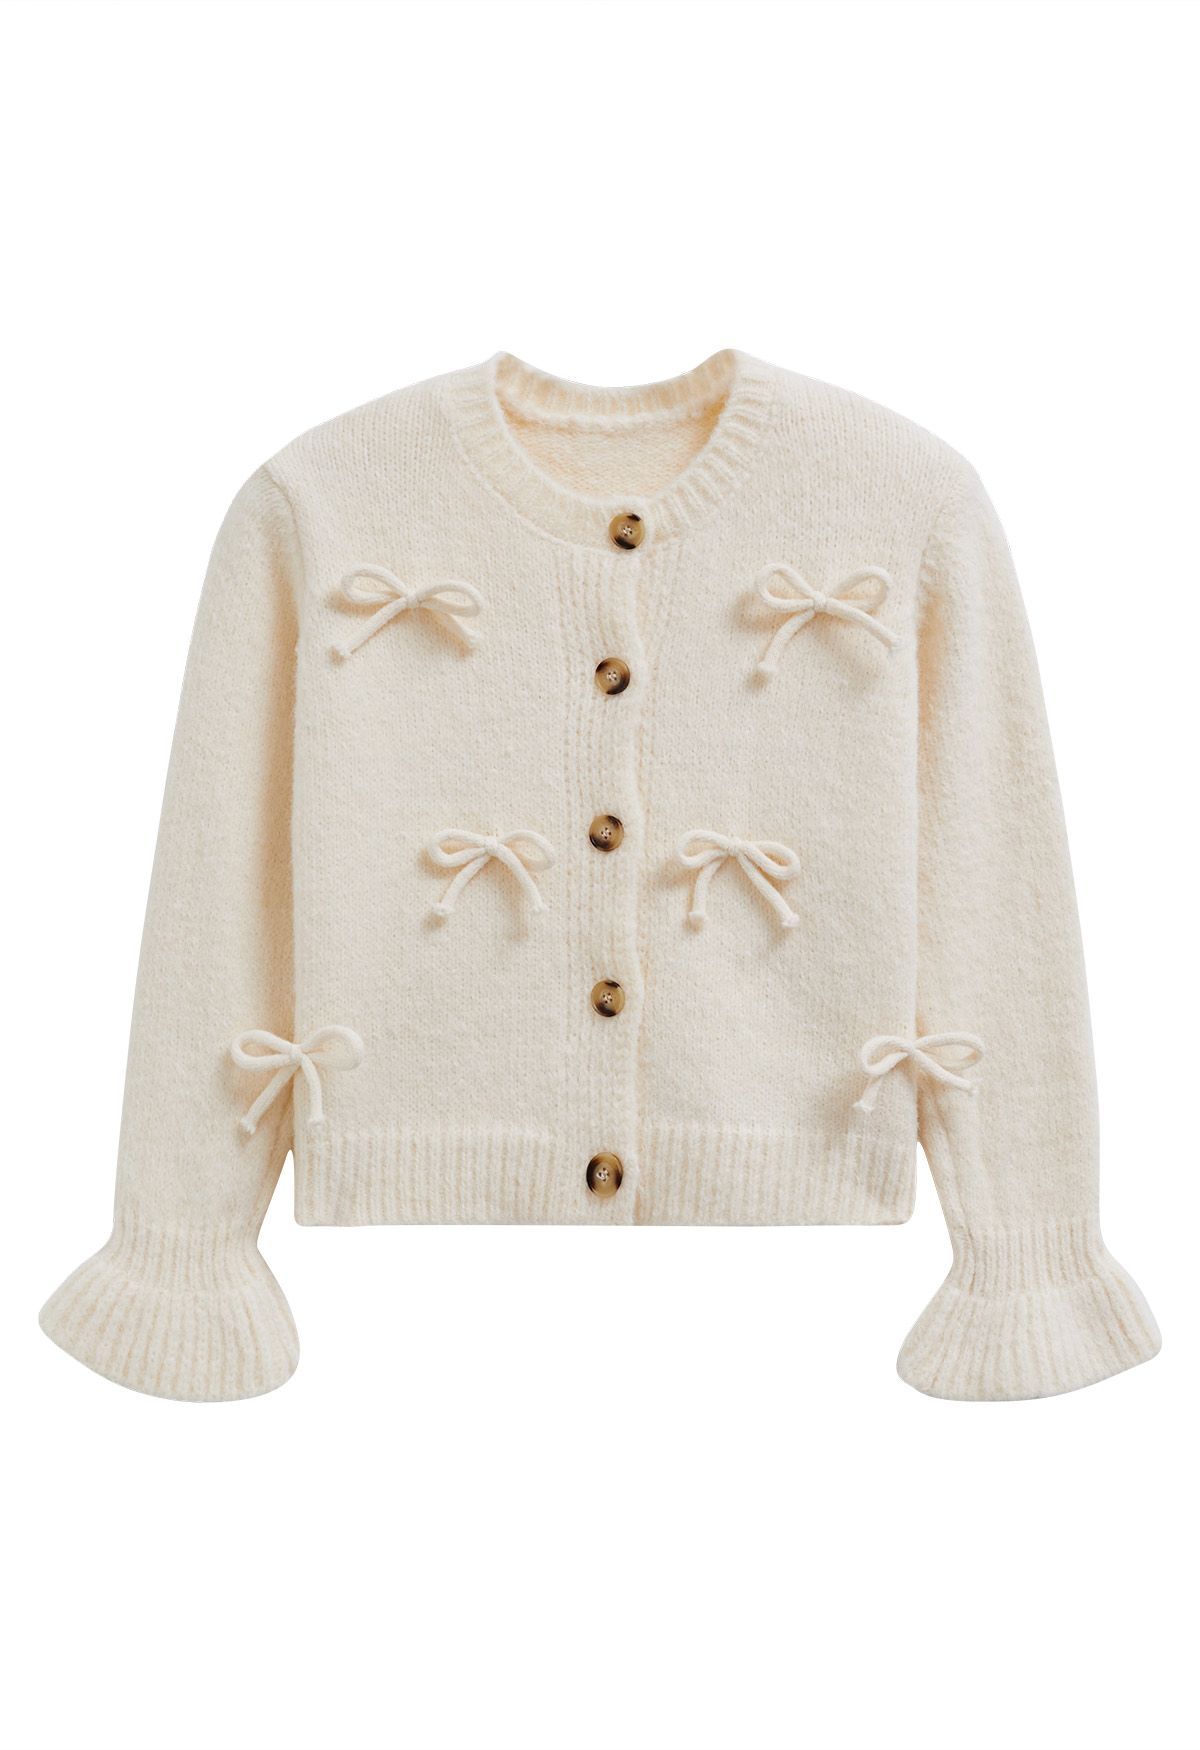 Adorable Bowknot Buttoned Knit Cardigan in Cream | Chicwish